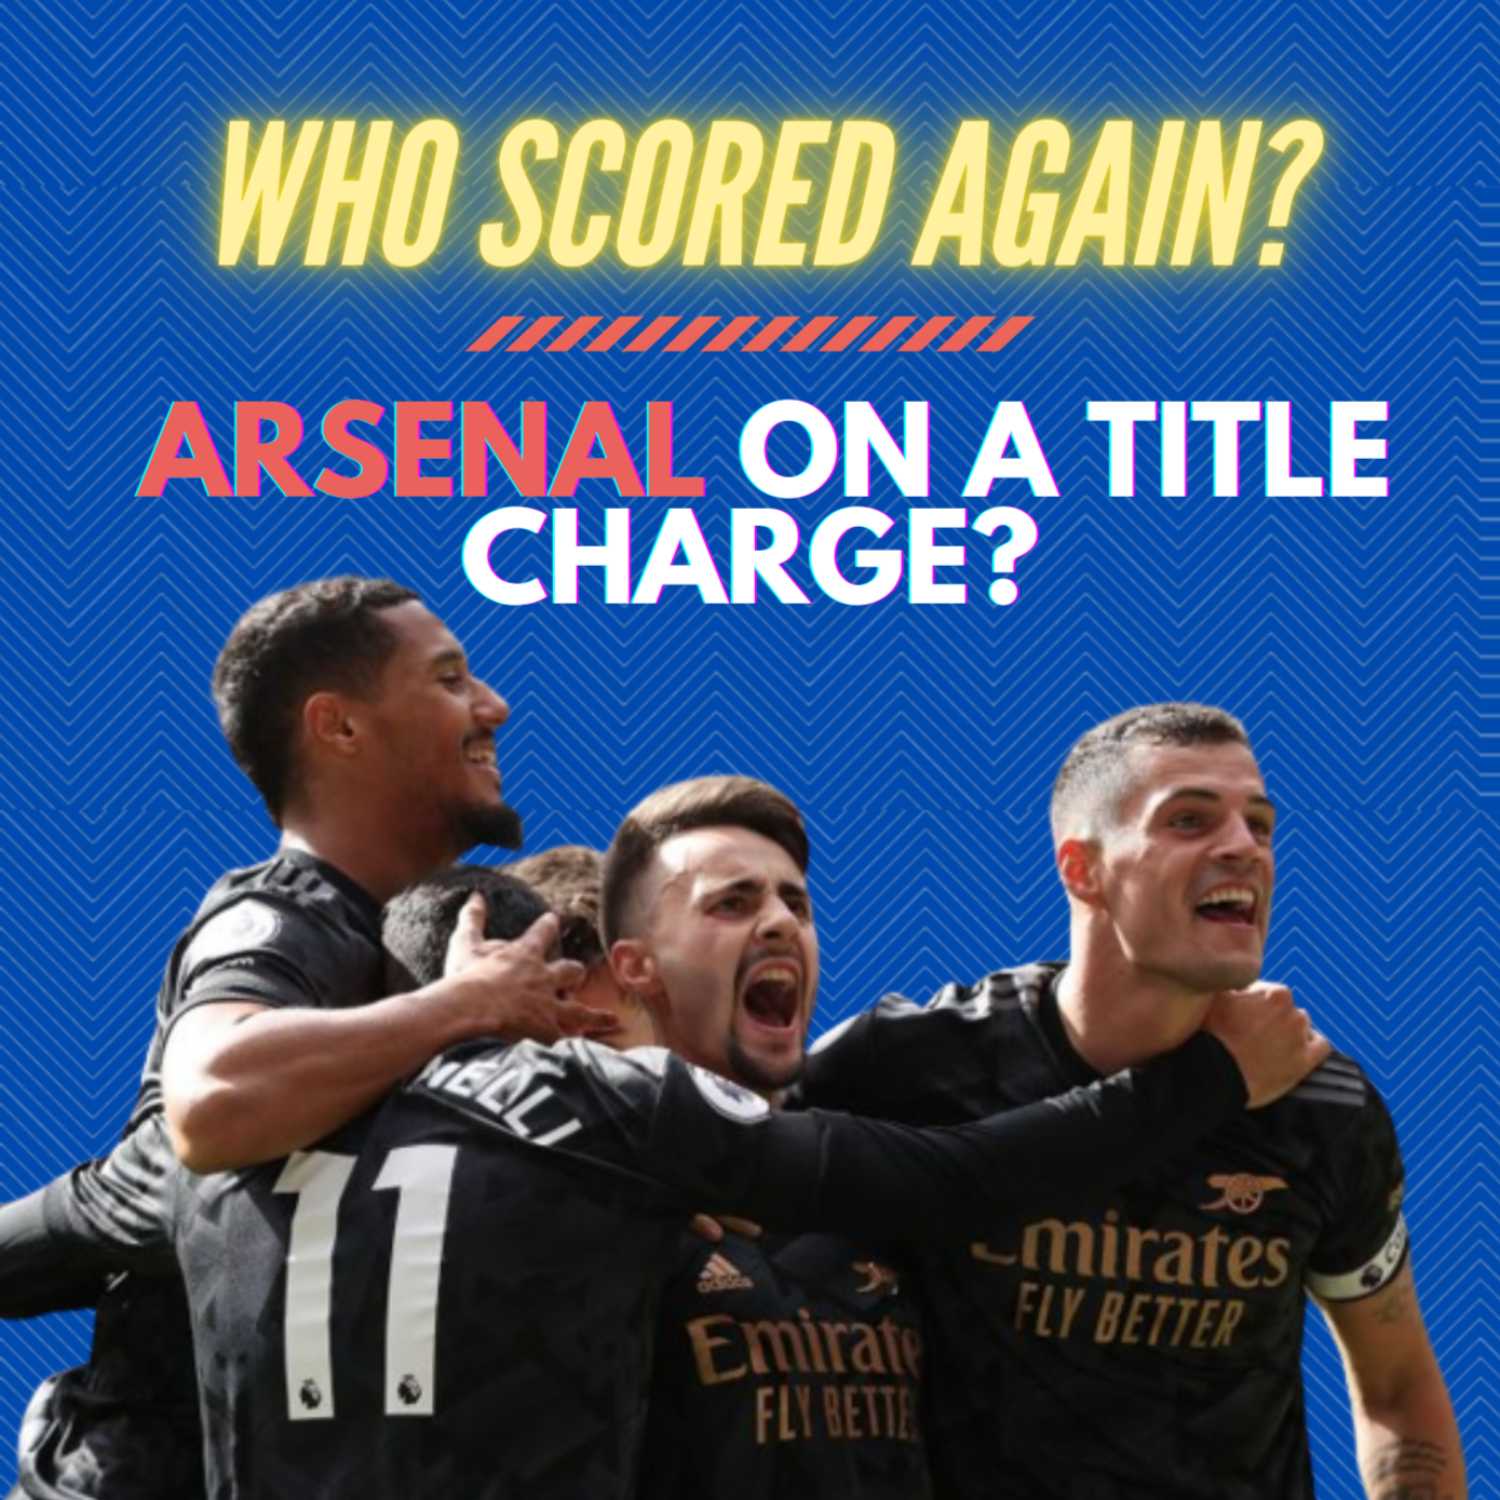 Arsenal on a title charge?- Gameweek 8 Review